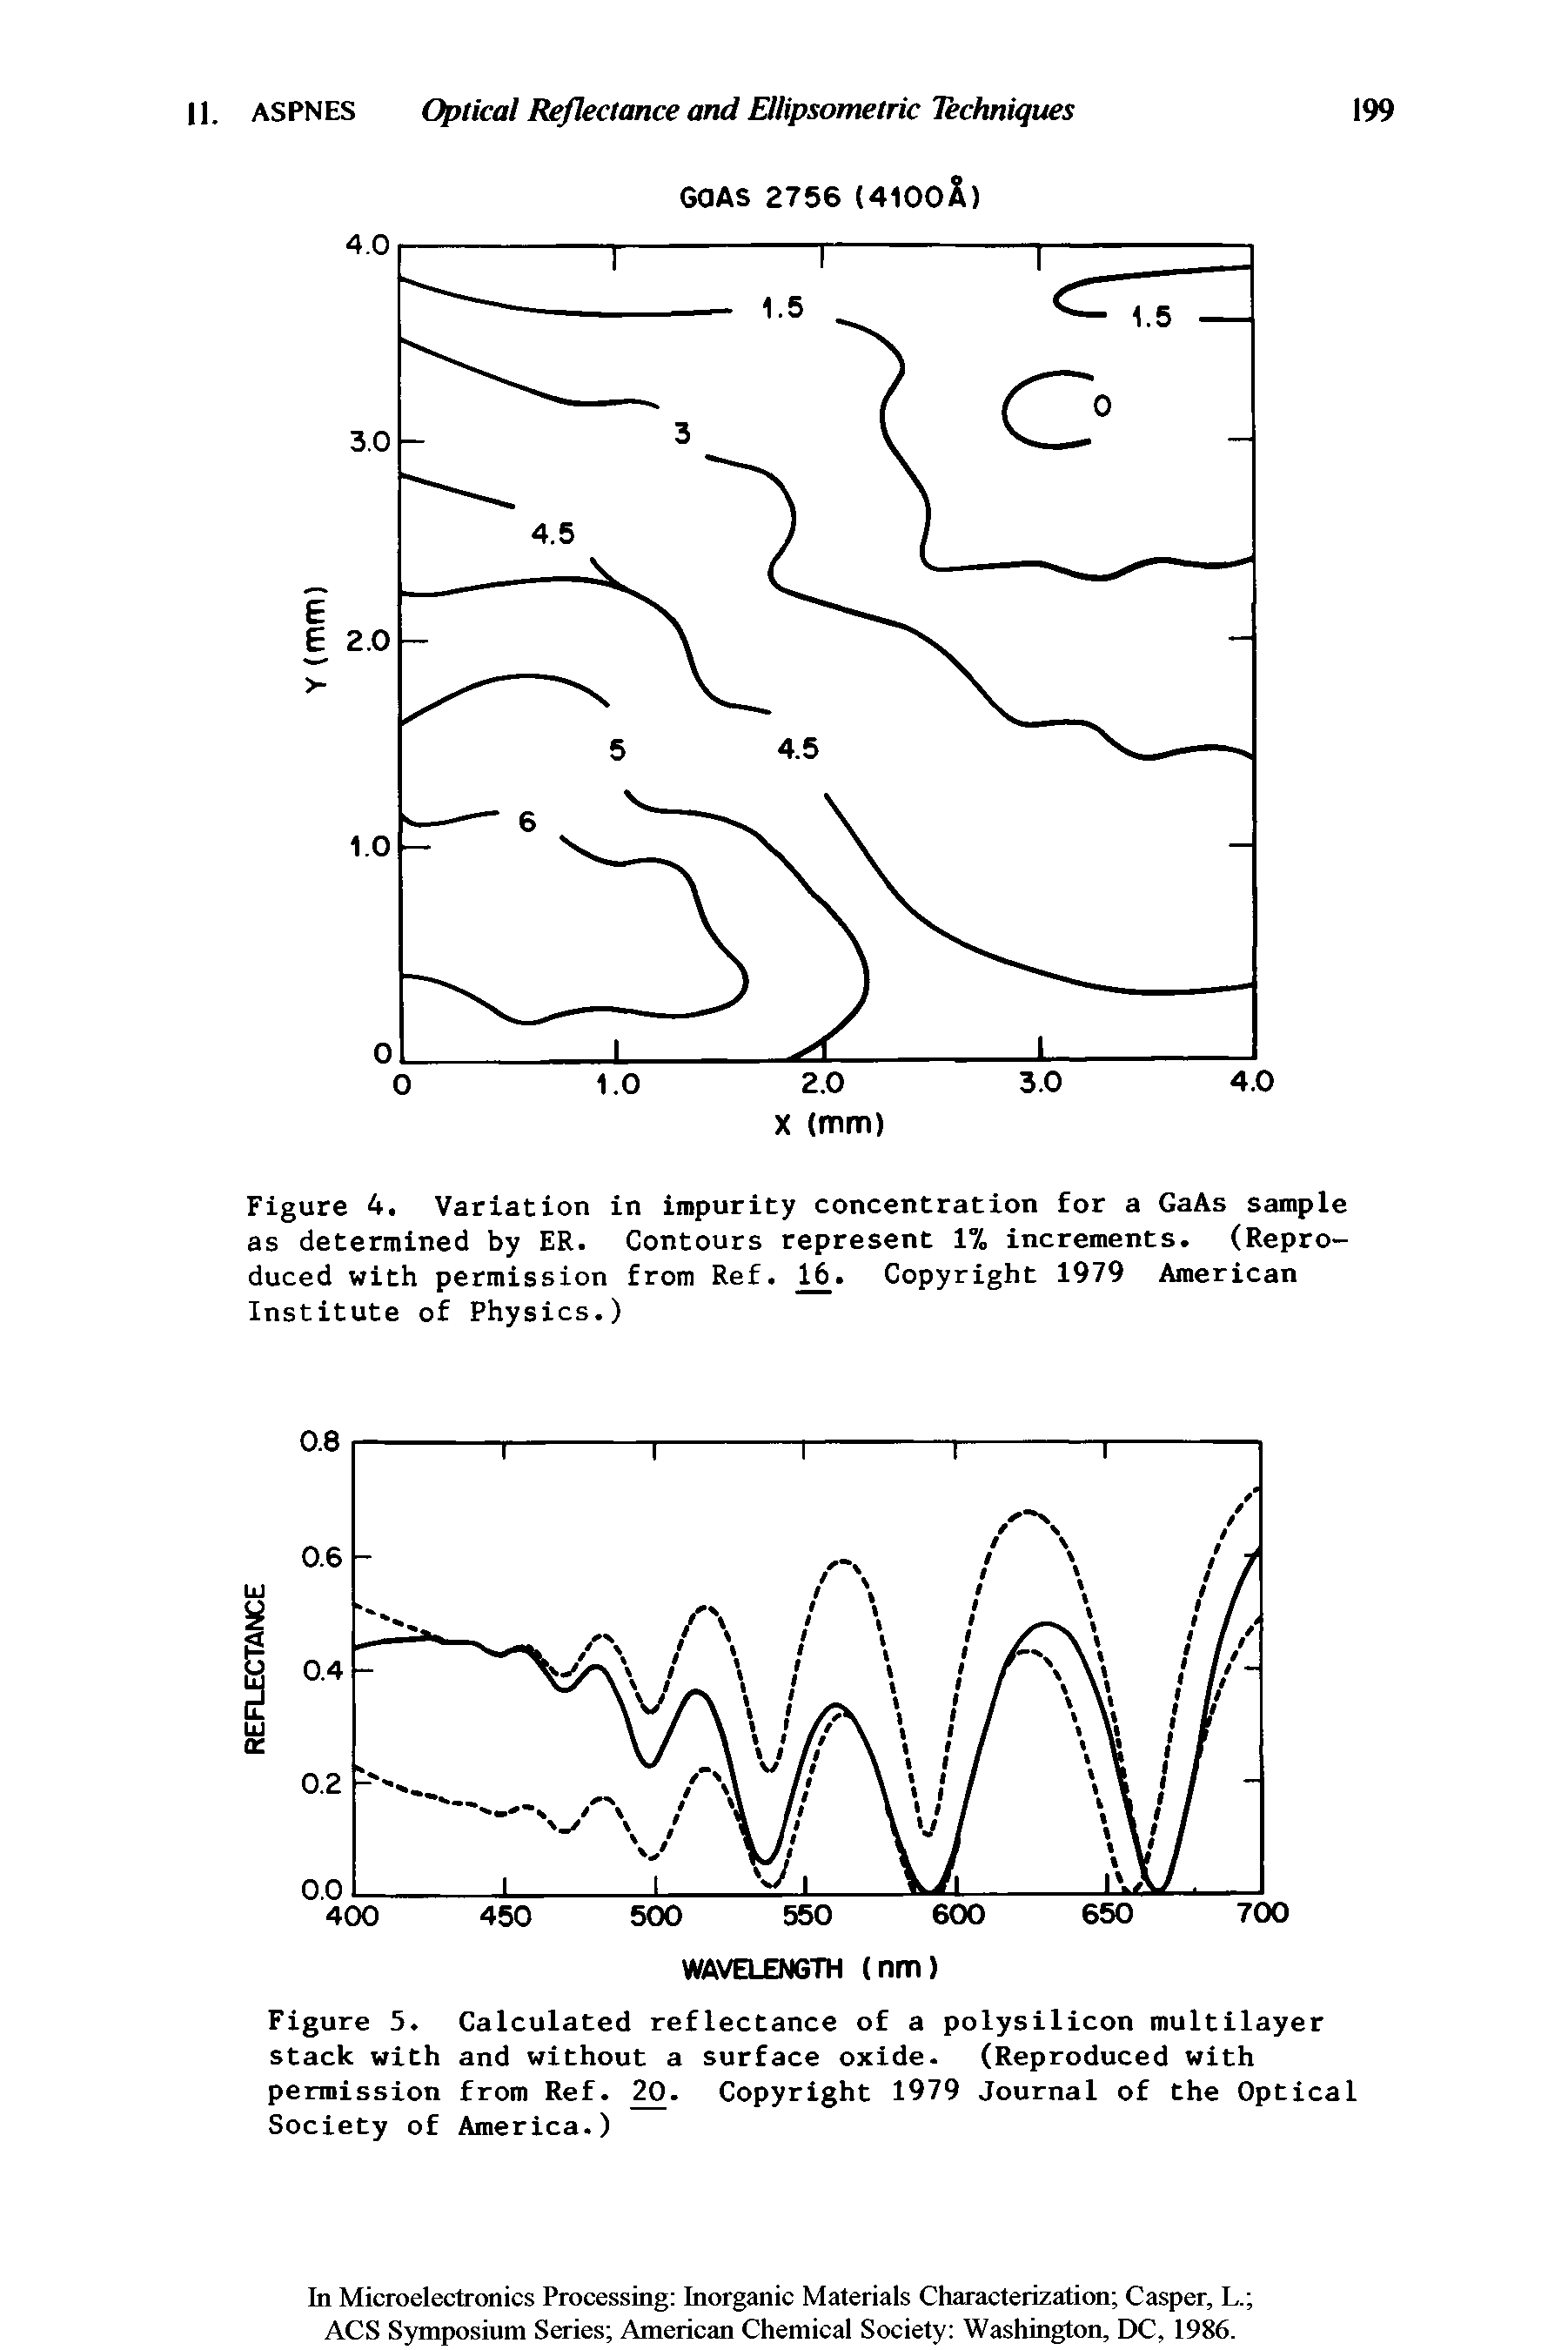 Figure 5. Calculated reflectance of a polysilicon multilayer stack with and without a surface oxide. (Reproduced with permission from Ref. M. Copyright 1979 Journal of the Optical Society of America.)...